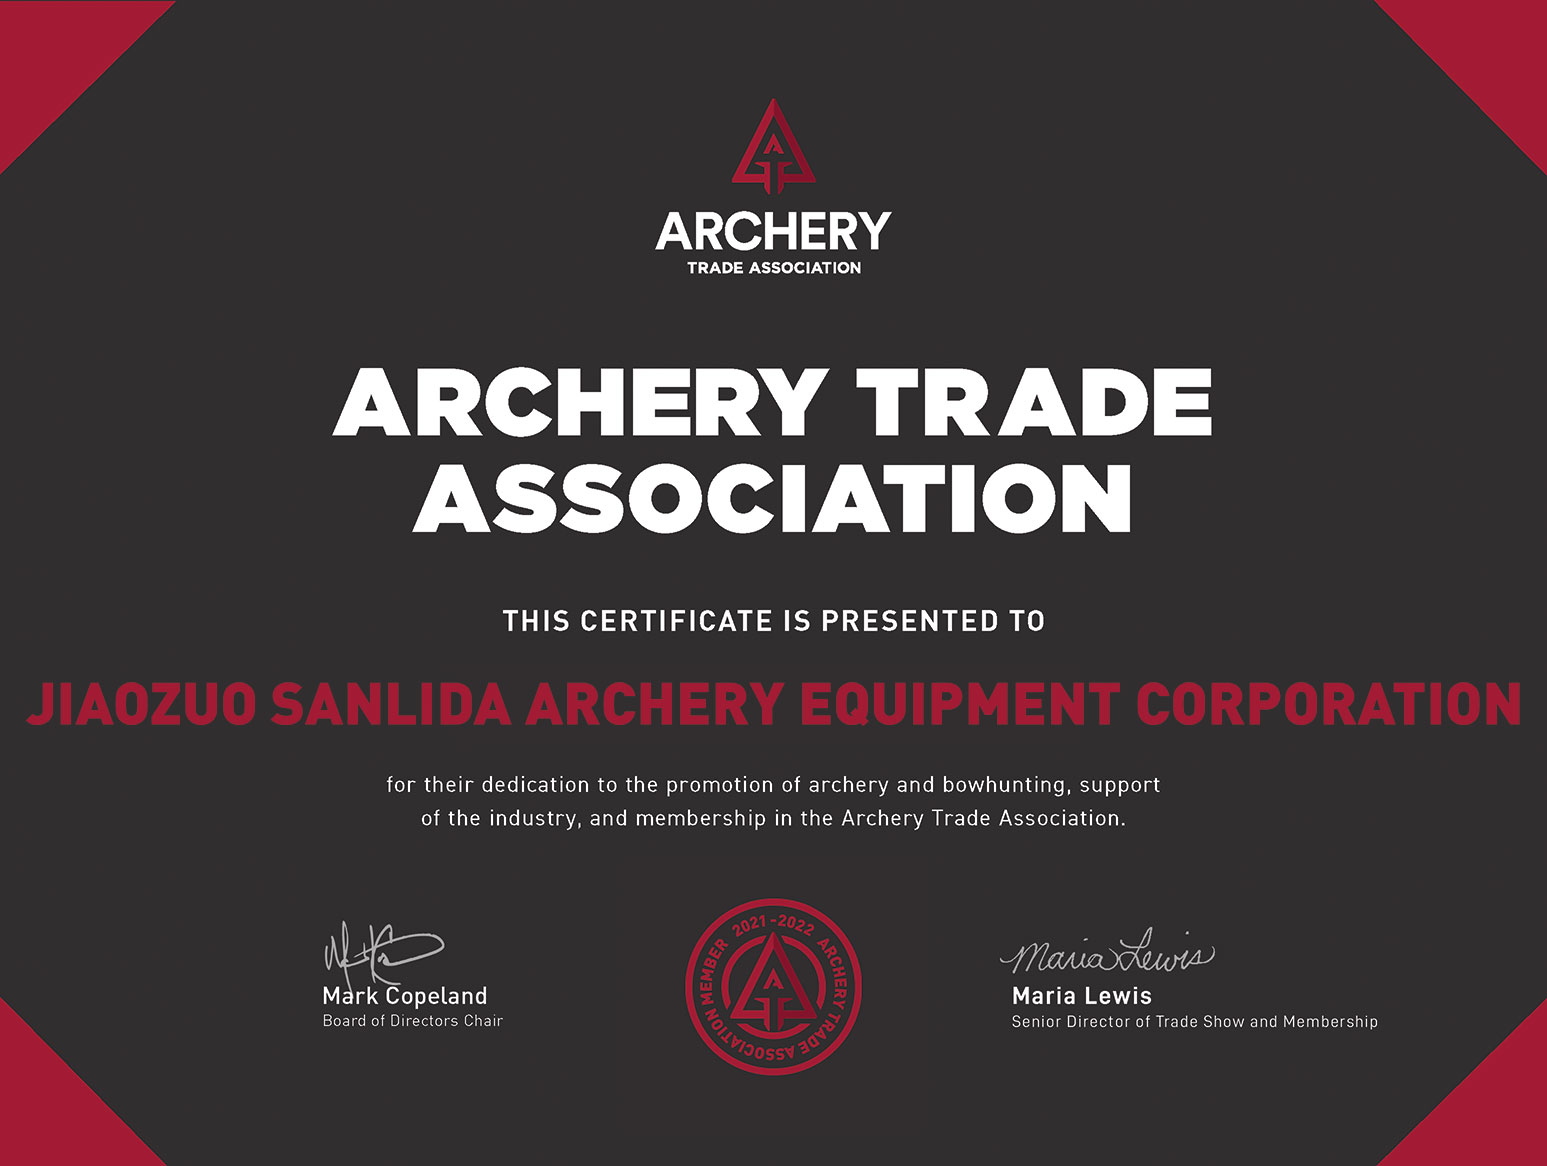 This certificate is presented to Jiaozuo Sanlida Archery Equipment Corporation f